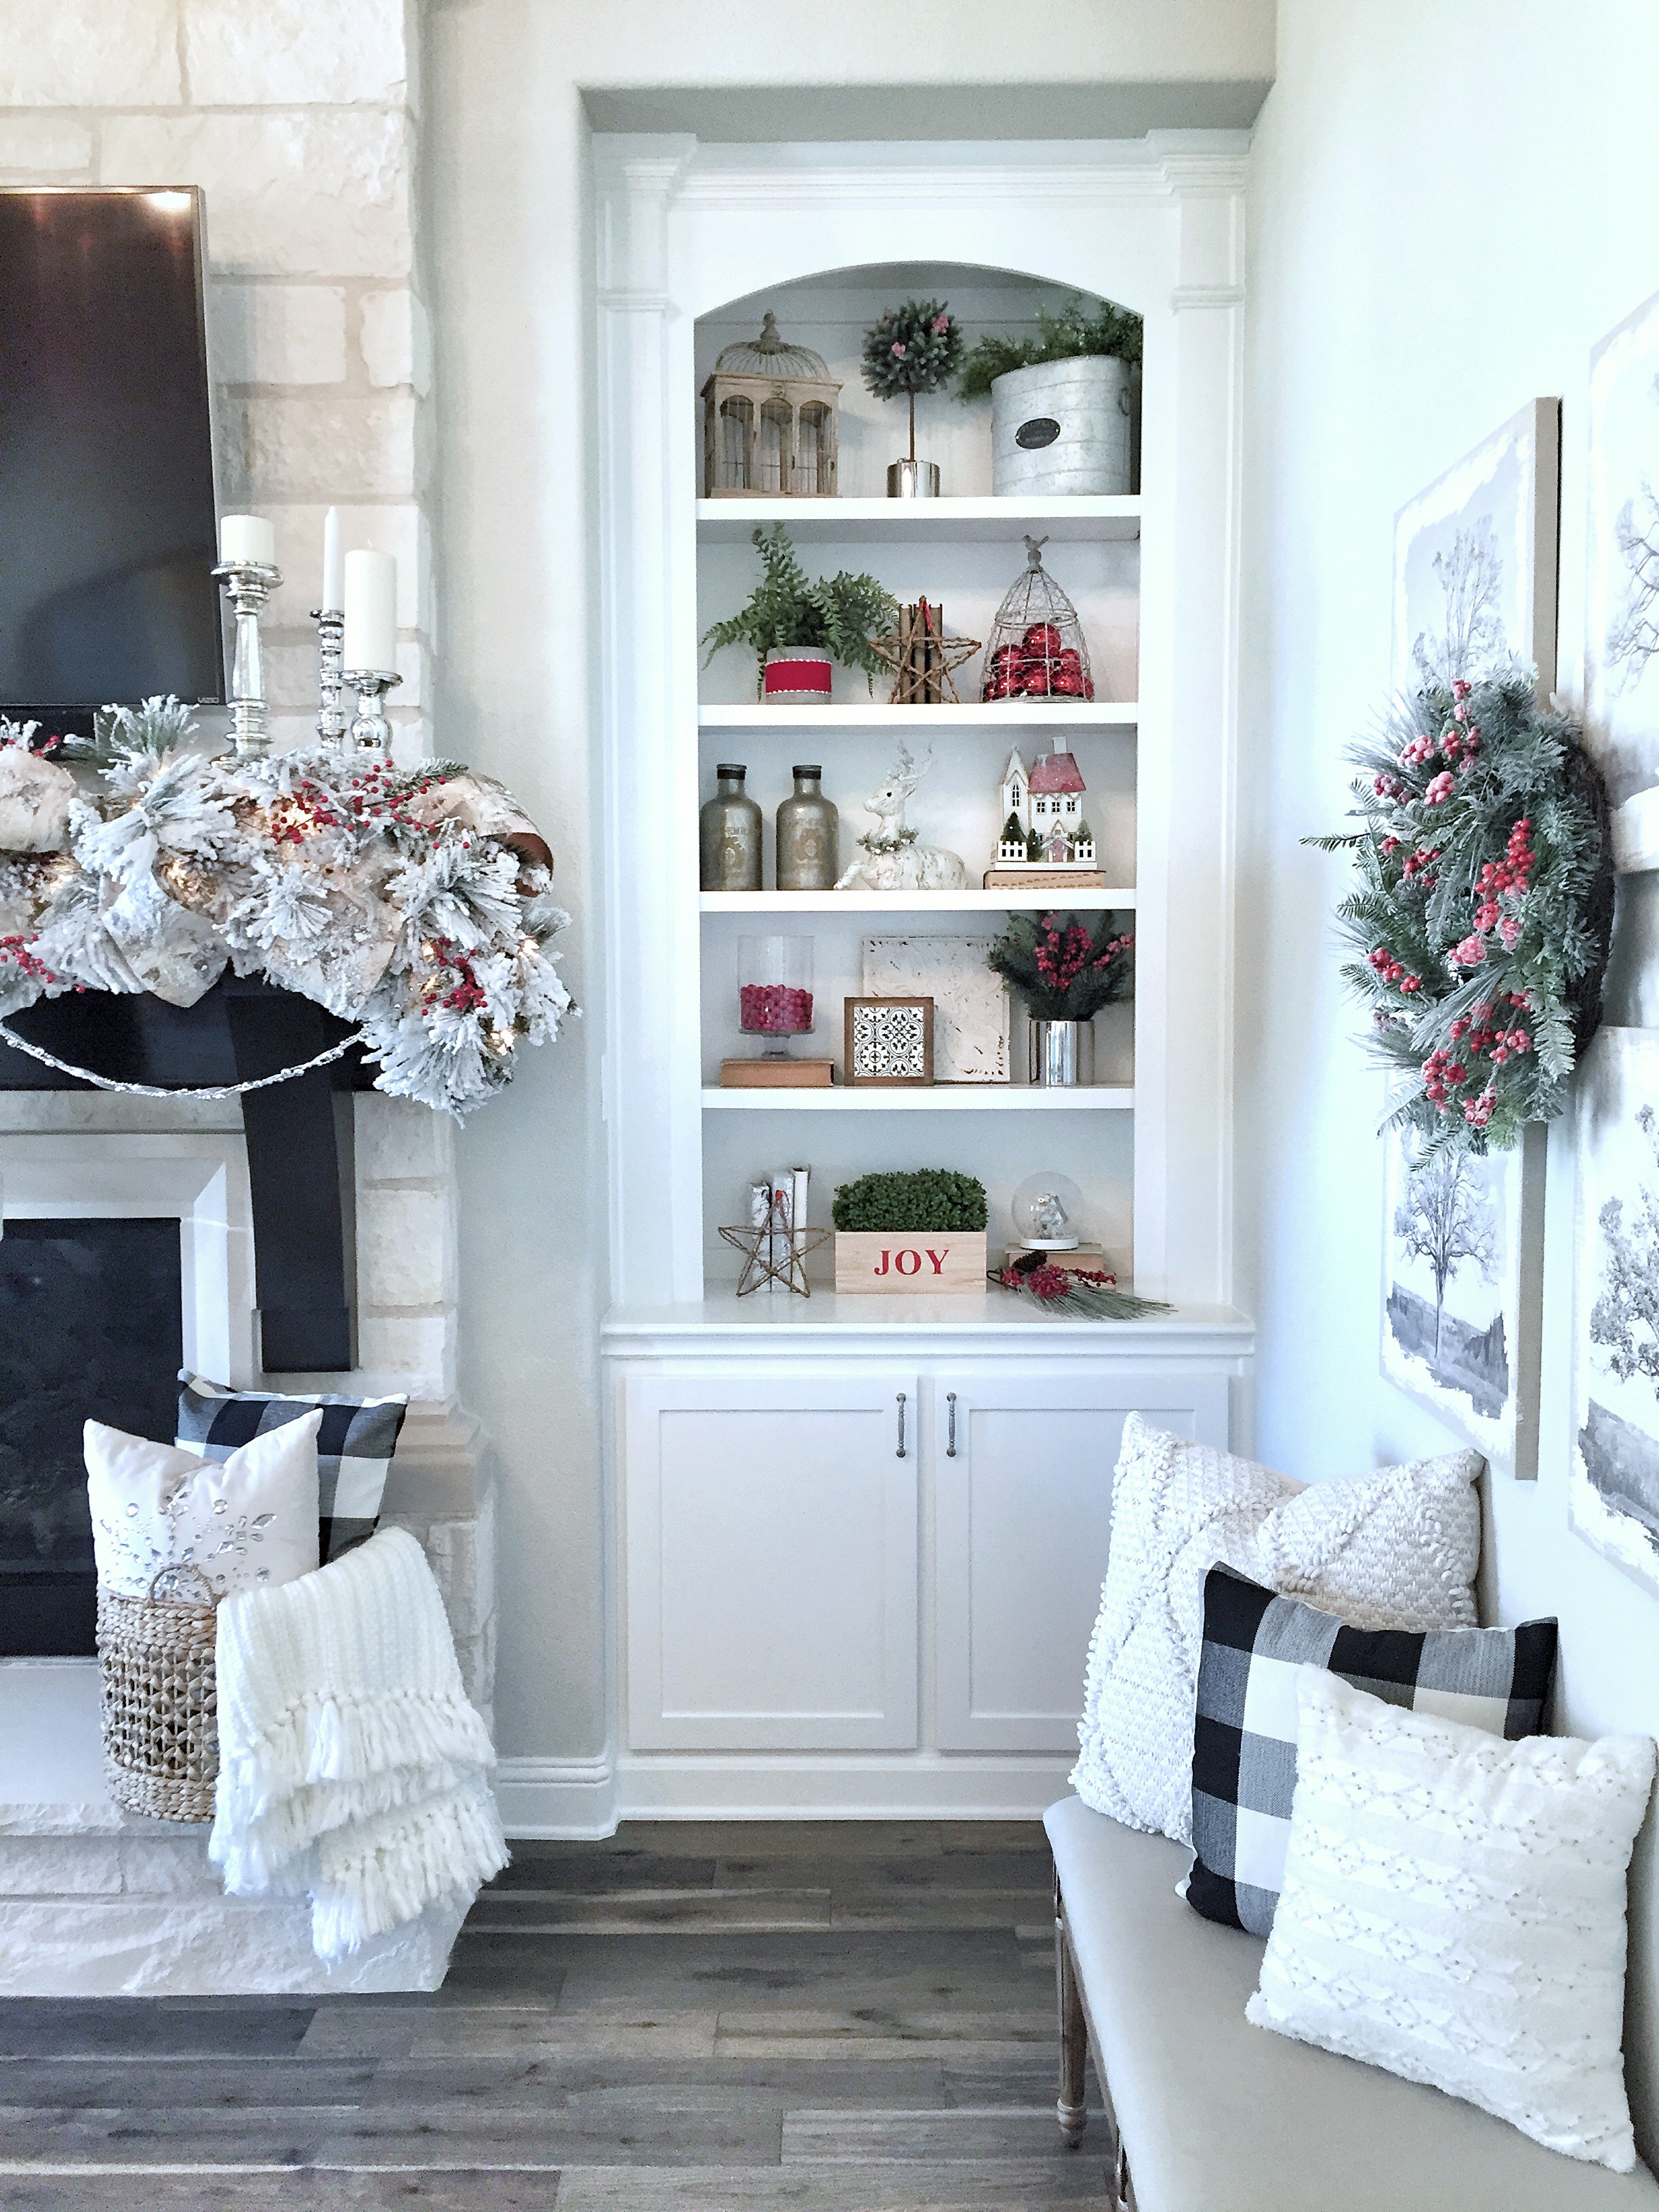 You Can't Stop Staring At These Stunning Christmas Shelf Decor Ideas